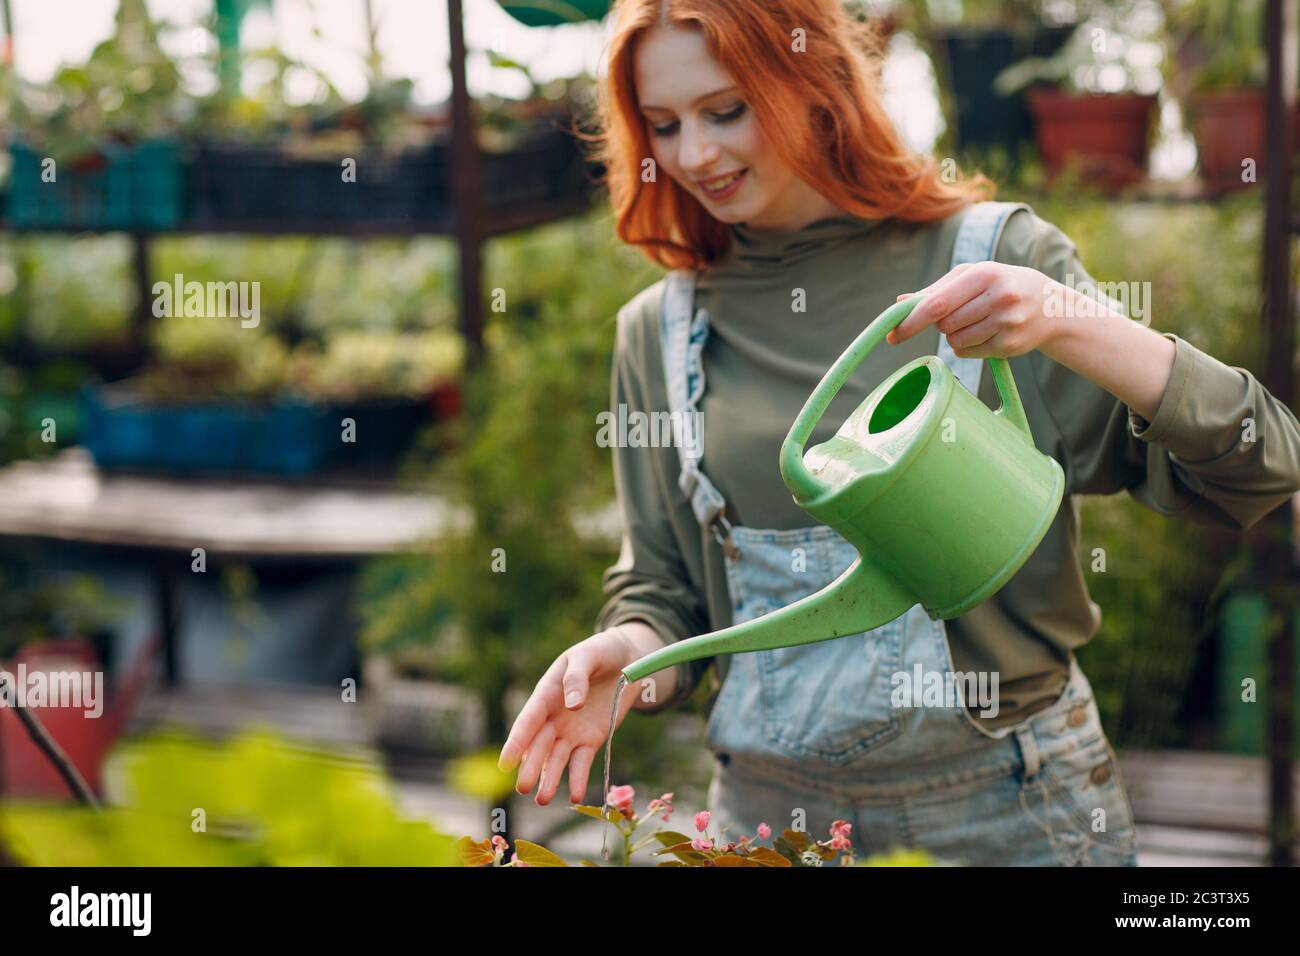 Home gardening concept. Young woman watering plants floral in greenhouse Stock Photo